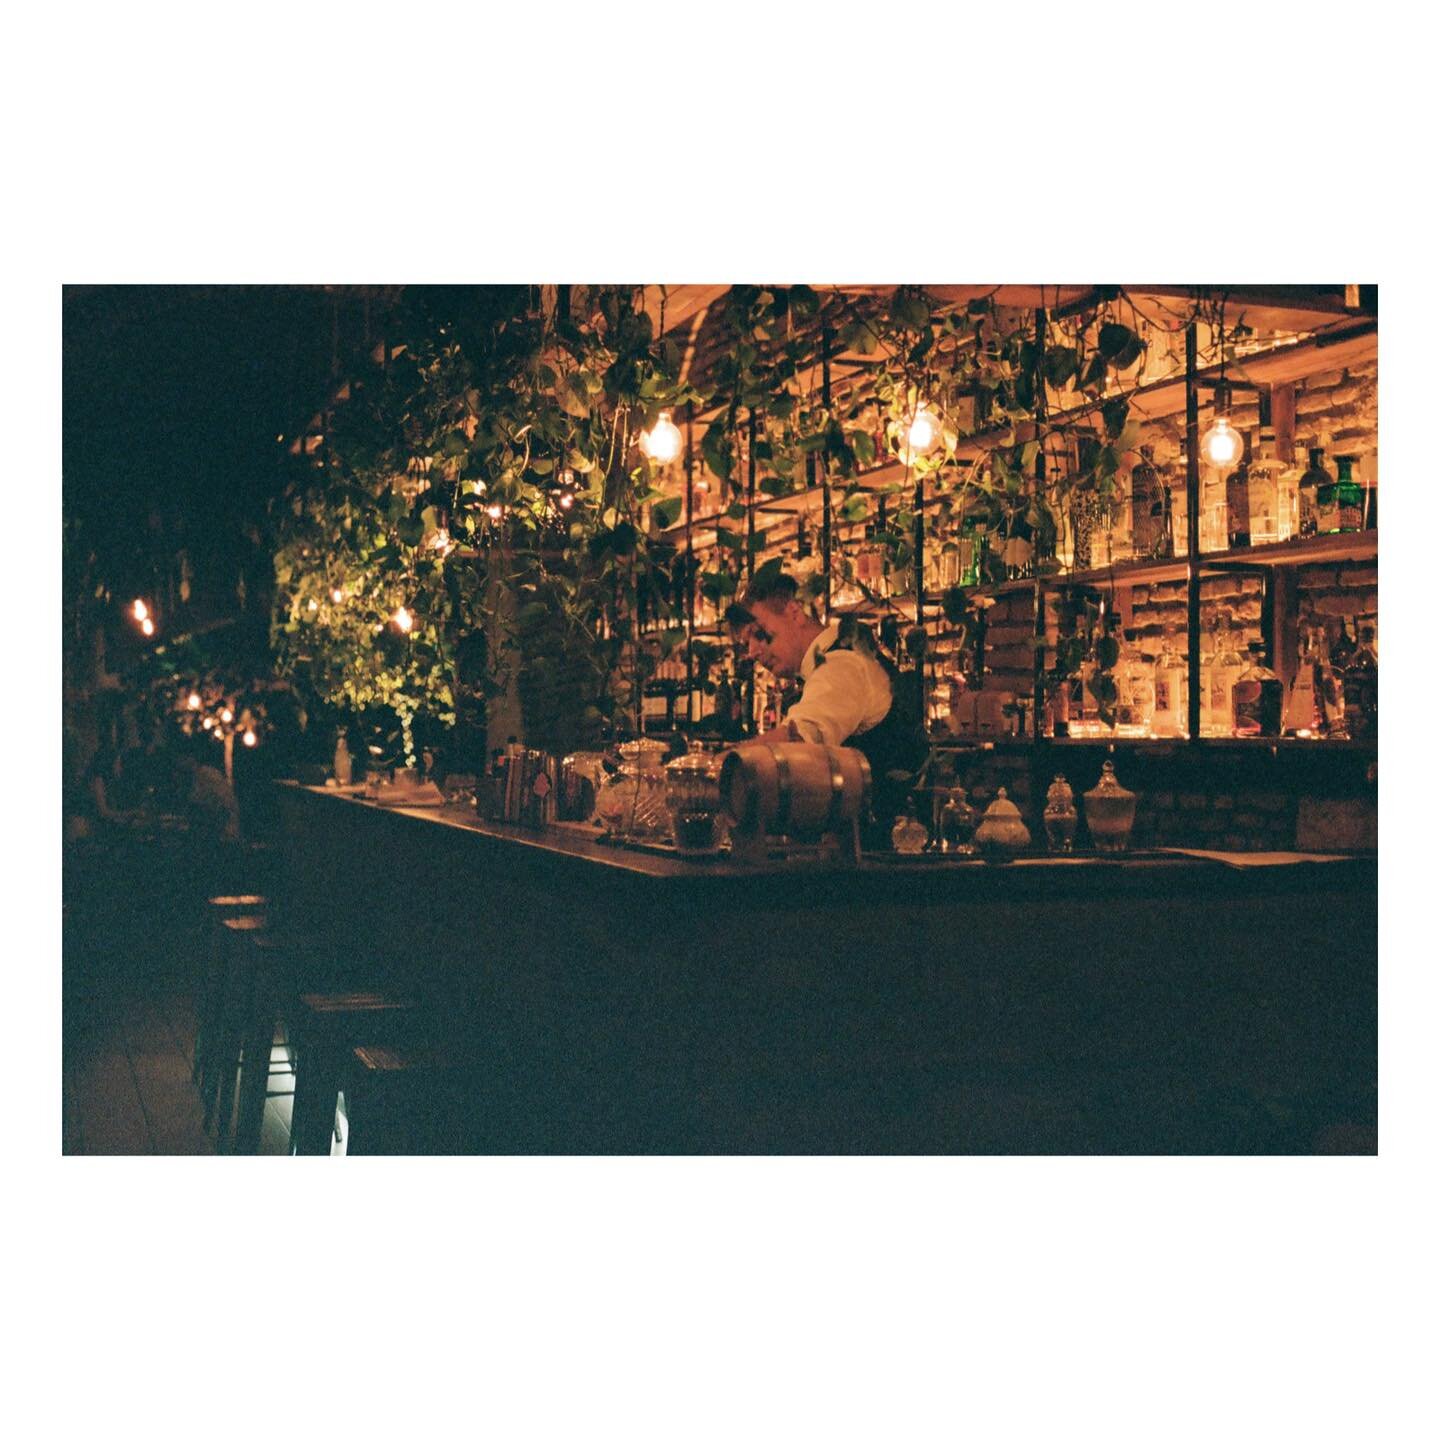 one night in Julia &amp; I walked down a street in Rome and peeked into @clorofillaroma to find a magical bar filled with plants, delicious one of a kind cocktails &amp; all the green 🌿vibes you could want
.
.
.
Roma, Italia 
August 2022
.
#roma #it